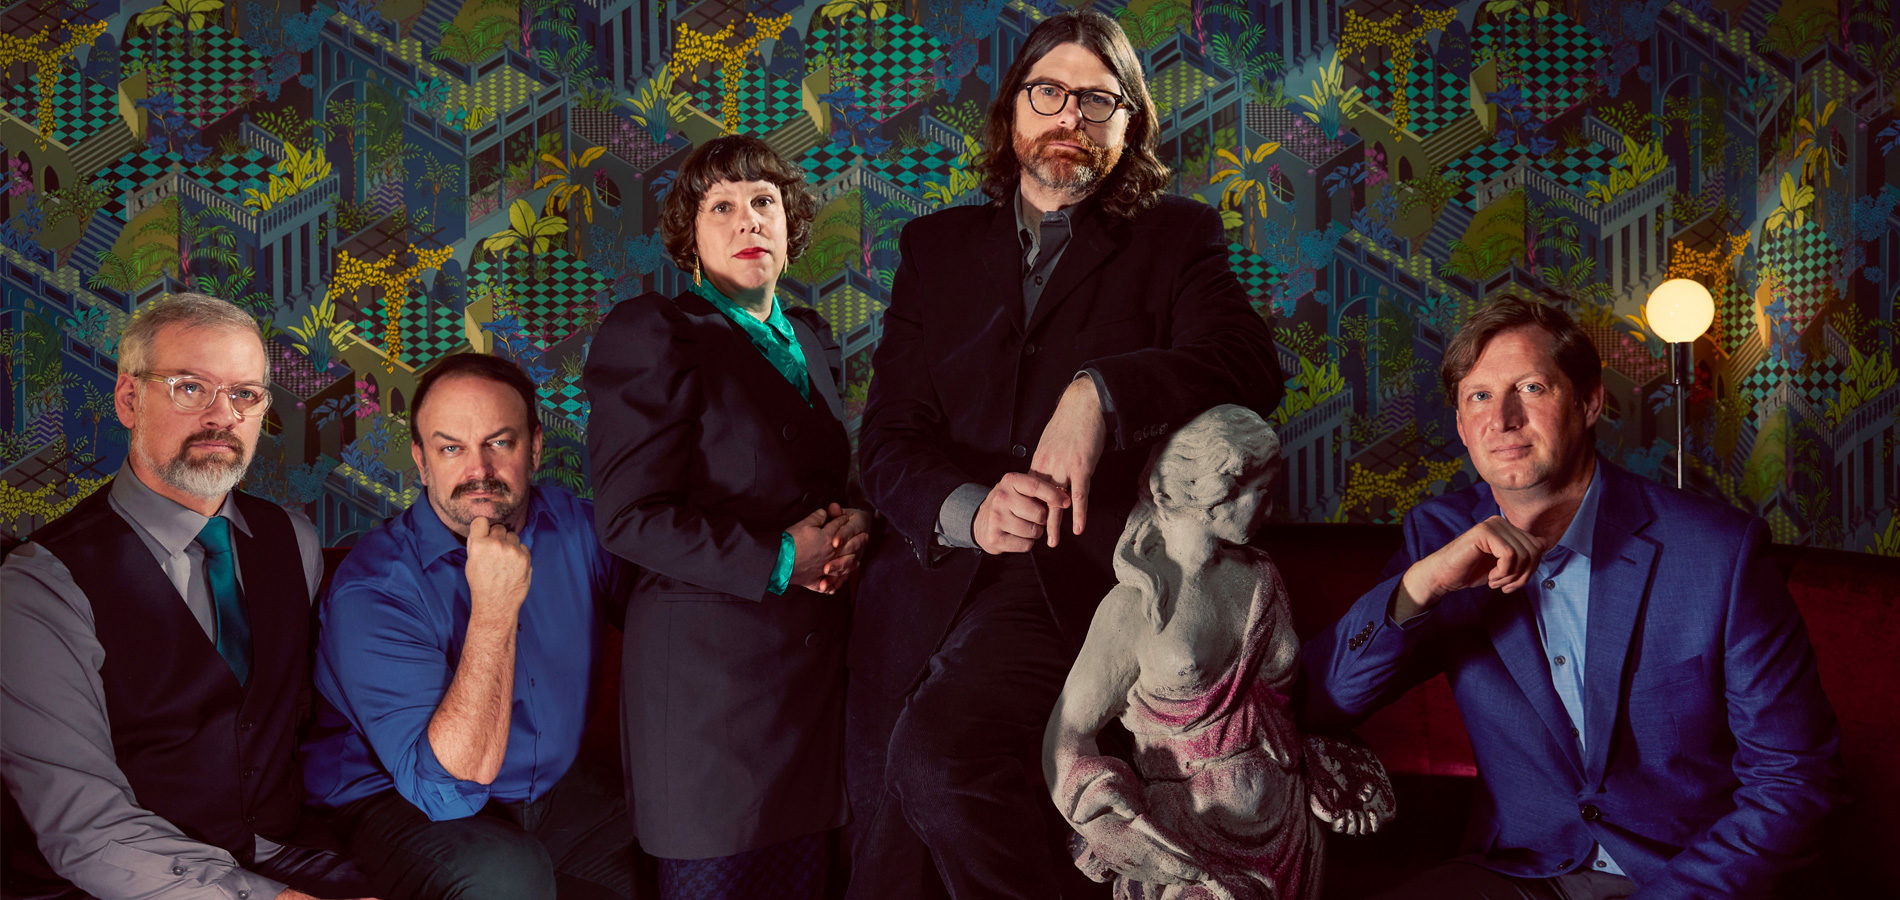 WXPN Welcomes The Decemberists